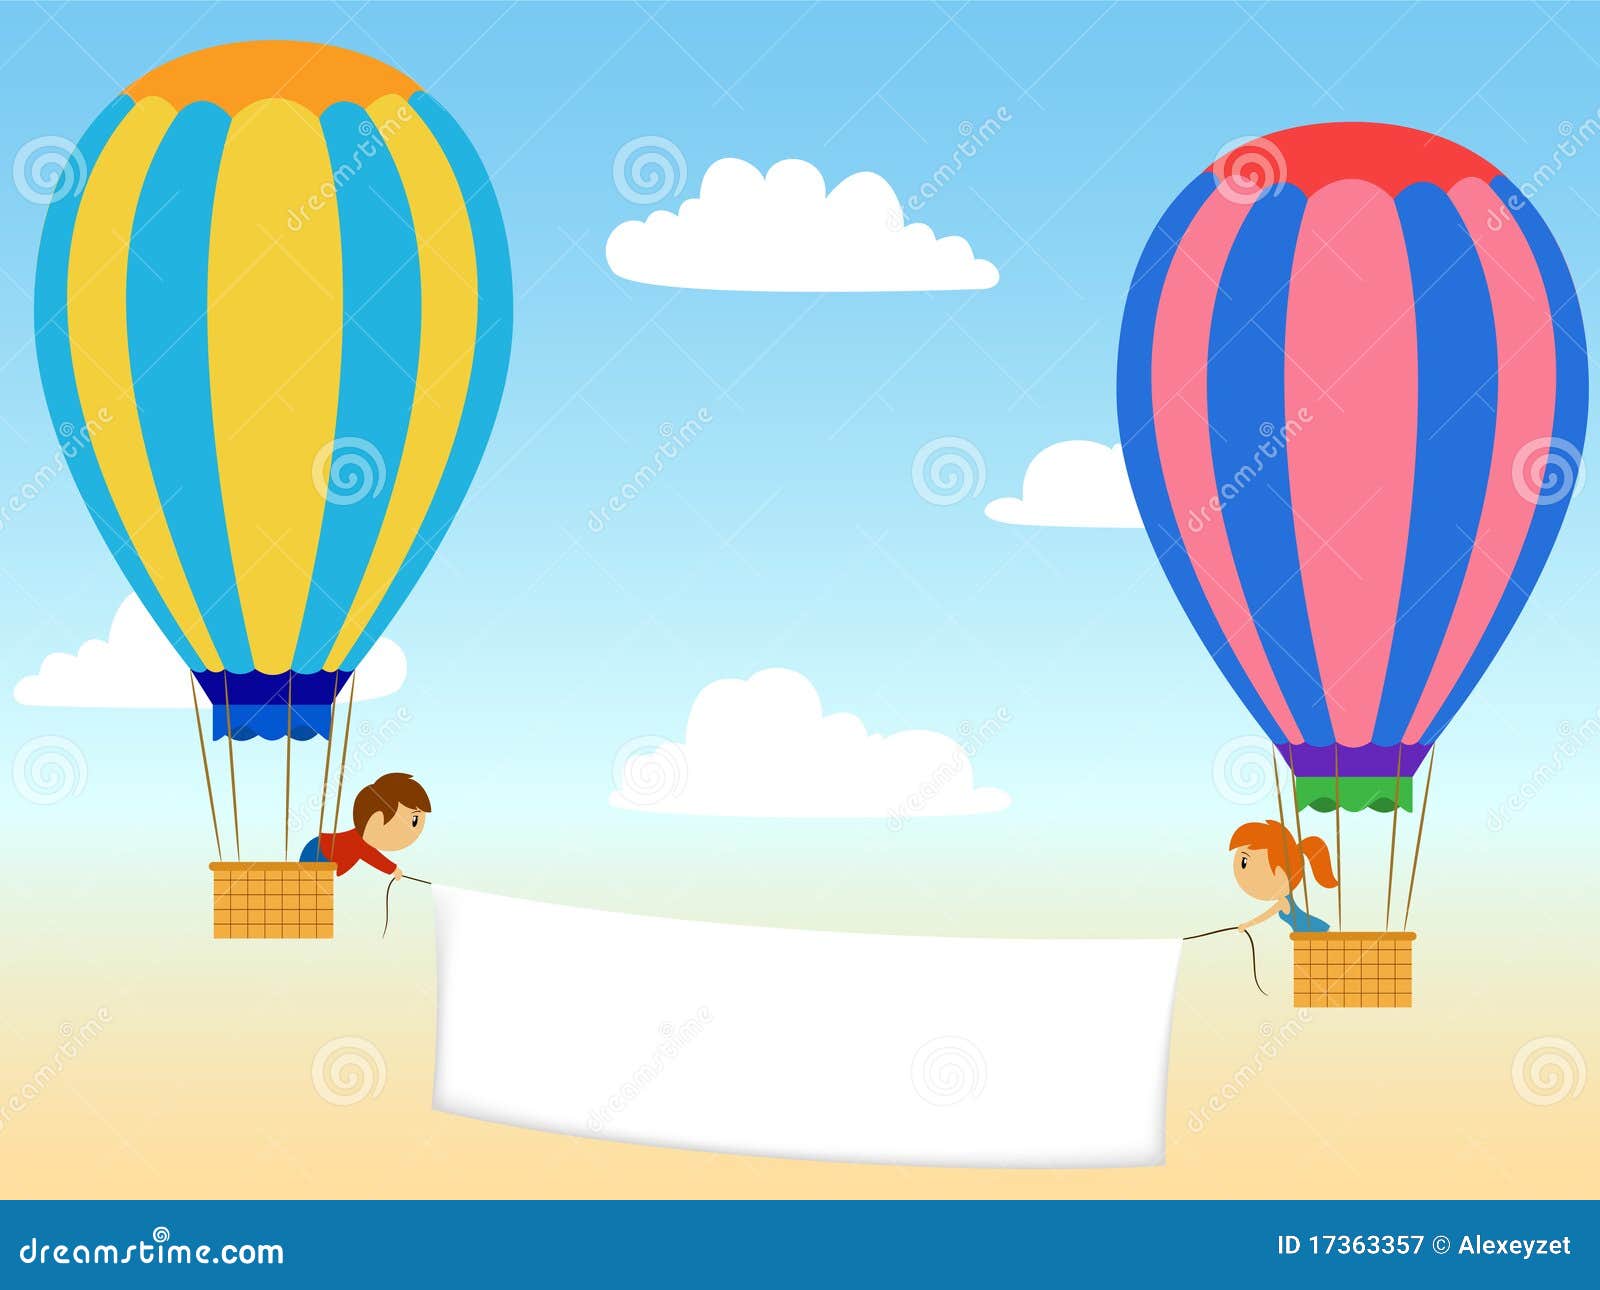 two cartoon aerostat with advertisment banner